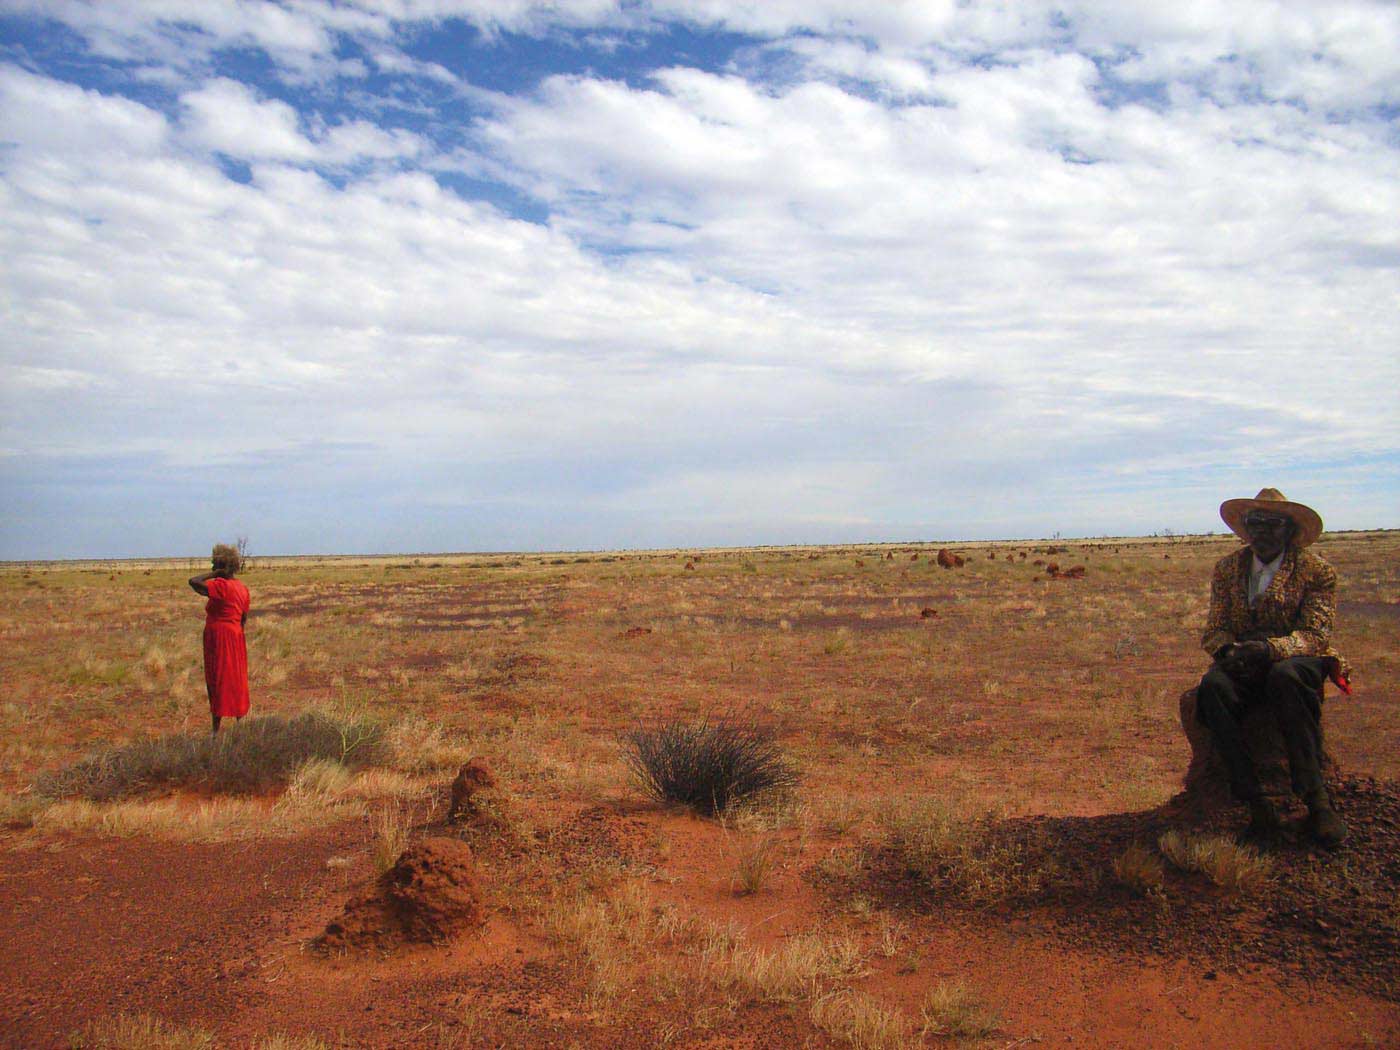 Colour photo of woman and man in a barren looking landscape.